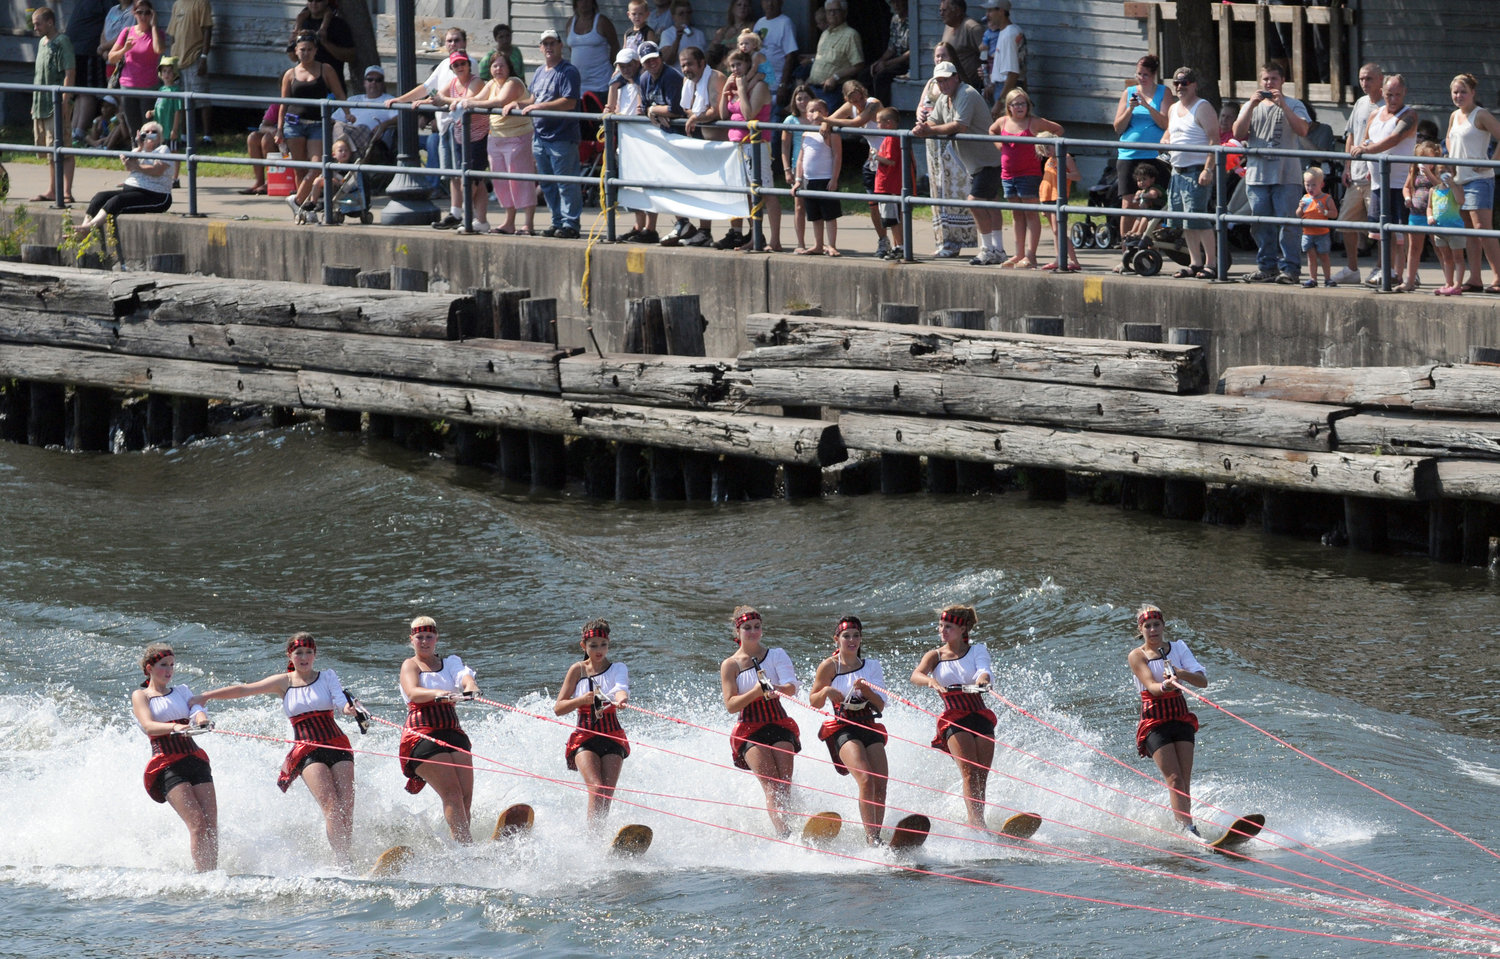 CanalFest ’22 will take place this Friday through Sunday, Aug. 5-7, at Rome's Bellamy Harbor Park on the Erie Canal. CanalFest concludes on Sunday with the Water Ski Show featuring Mohawk Valley Ski School, as pictured in this file photo.